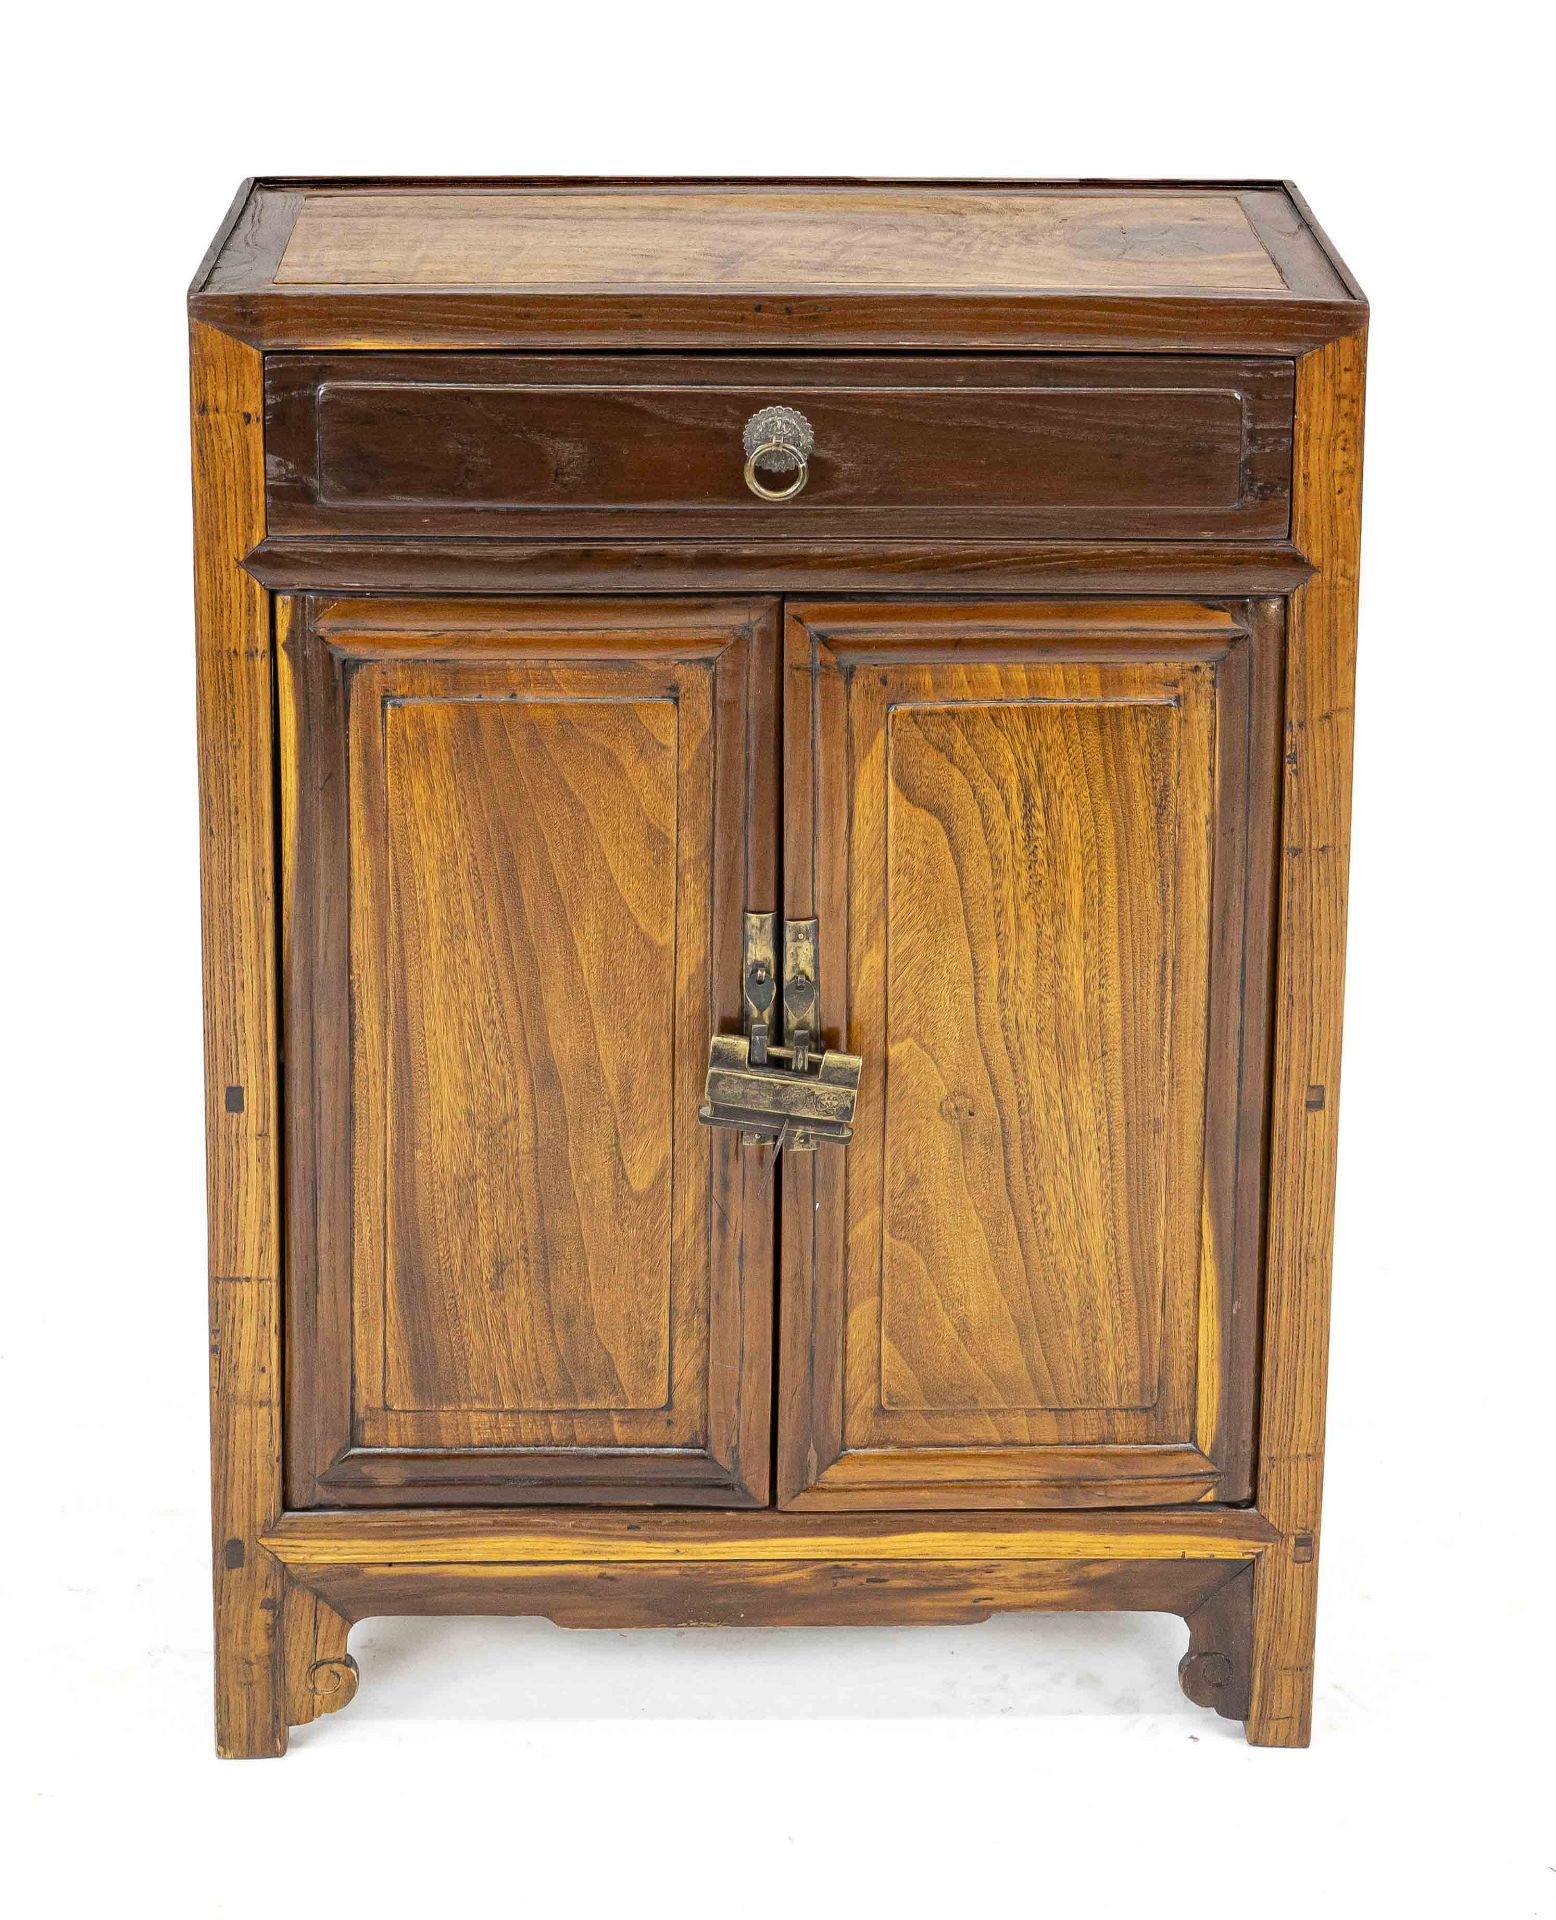 Asian half cupboard, 20th century, solid wood typical of the country, two doors with drawer, padlock